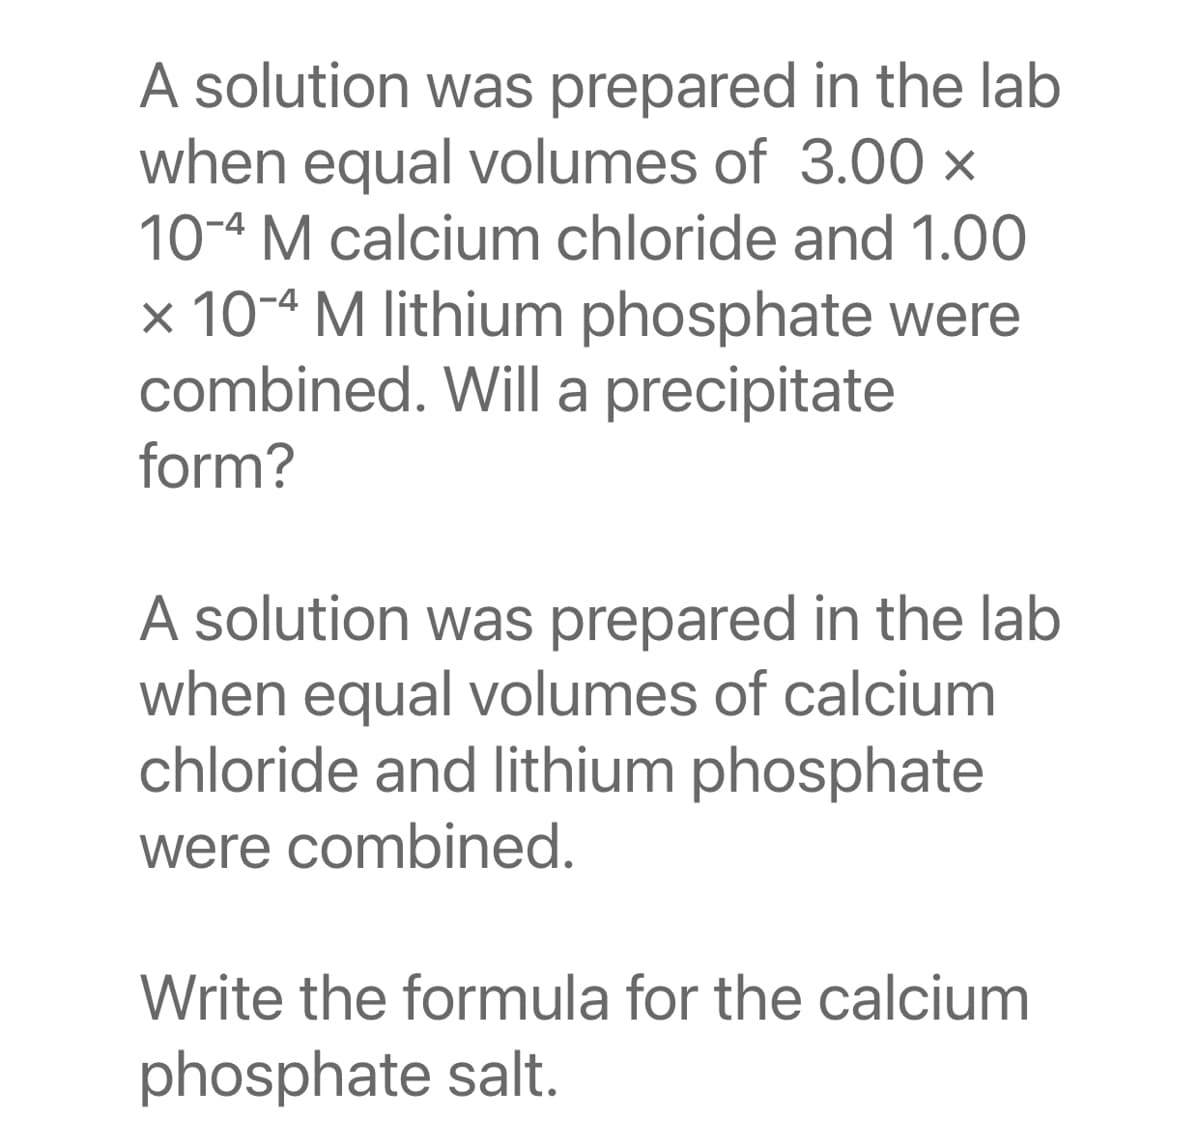 A solution was prepared in the lab
when equal volumes of 3.00 x
10-4 M calcium chloride and 1.00
× 10-4 M lithium phosphate were
combined. Will a precipitate
form?
A solution was prepared in the lab
when equal volumes of calcium
chloride and lithium phosphate
were combined.
Write the formula for the calcium
phosphate salt.
